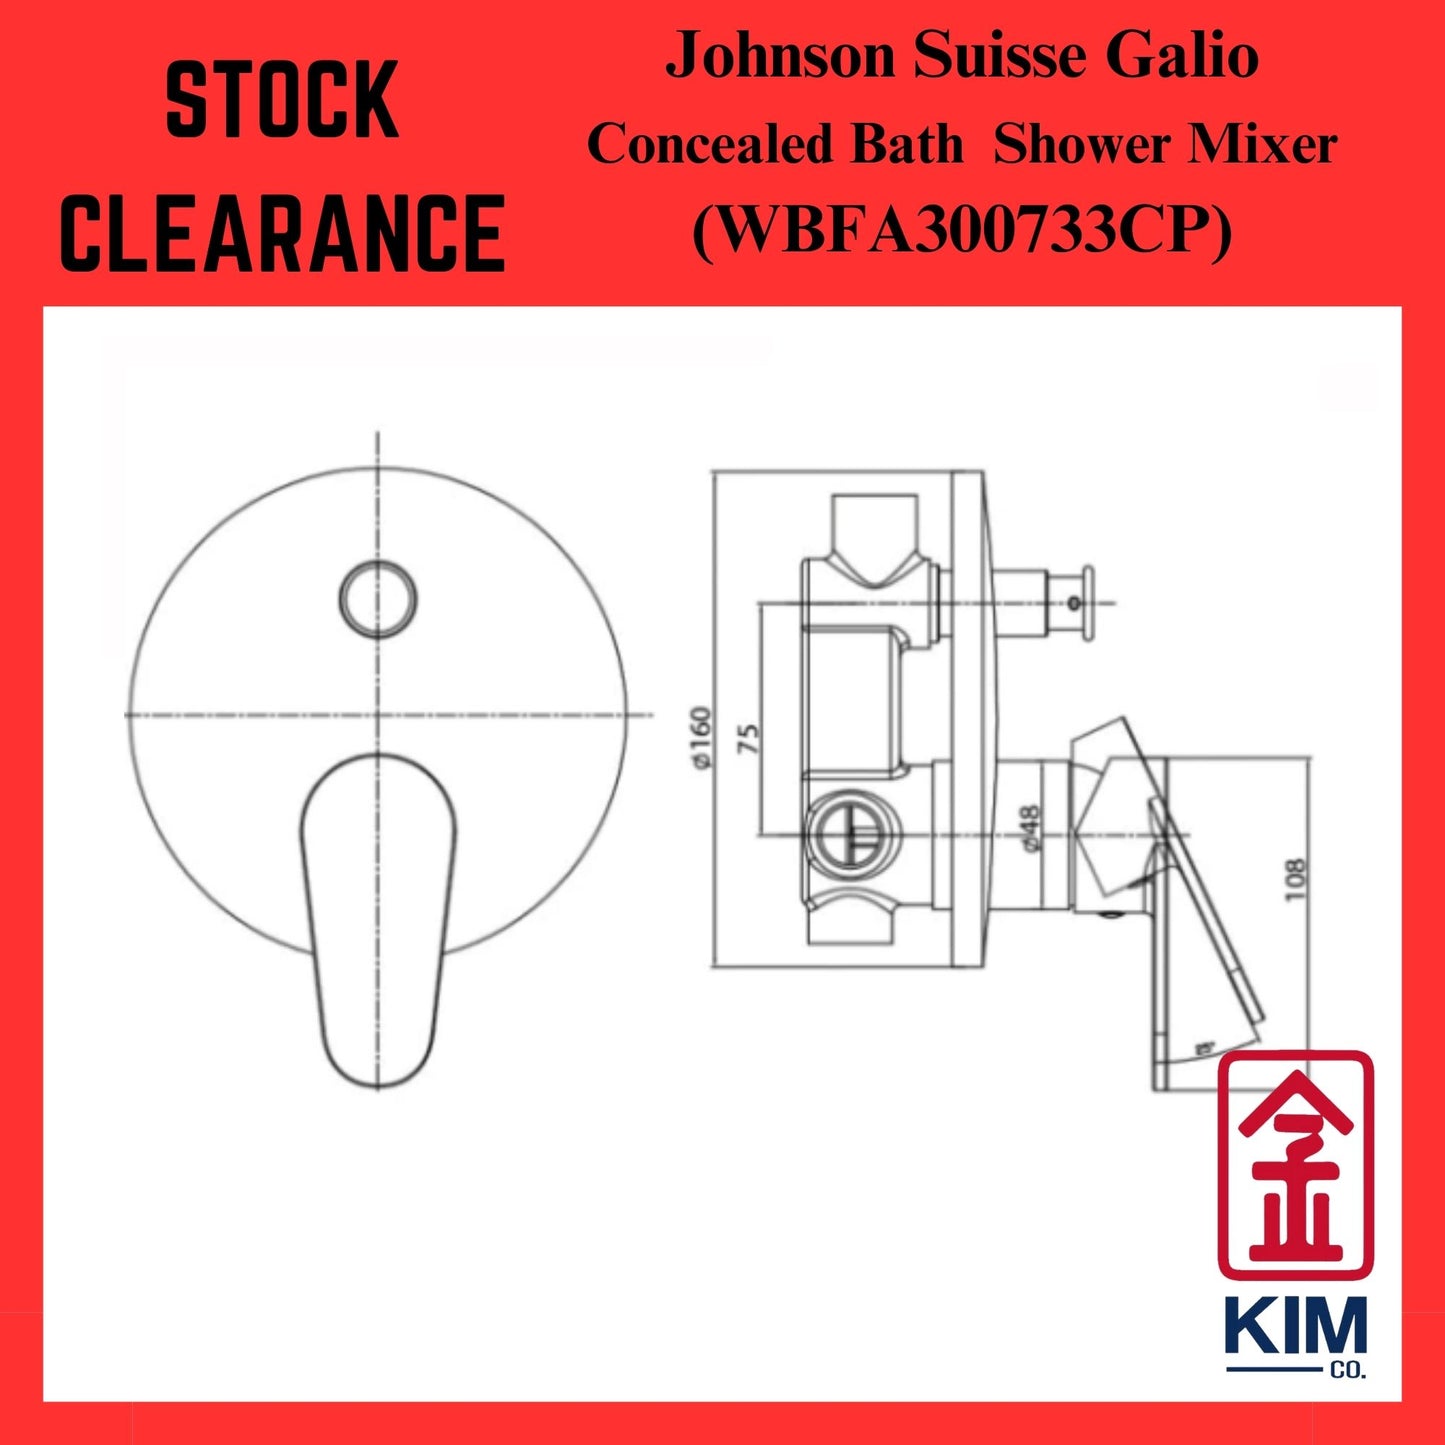 ( Stock Clearance ) Johnson Suisse Galio SL Concealed Bath Shower Mixer With Diverter (WBFA300733CP)